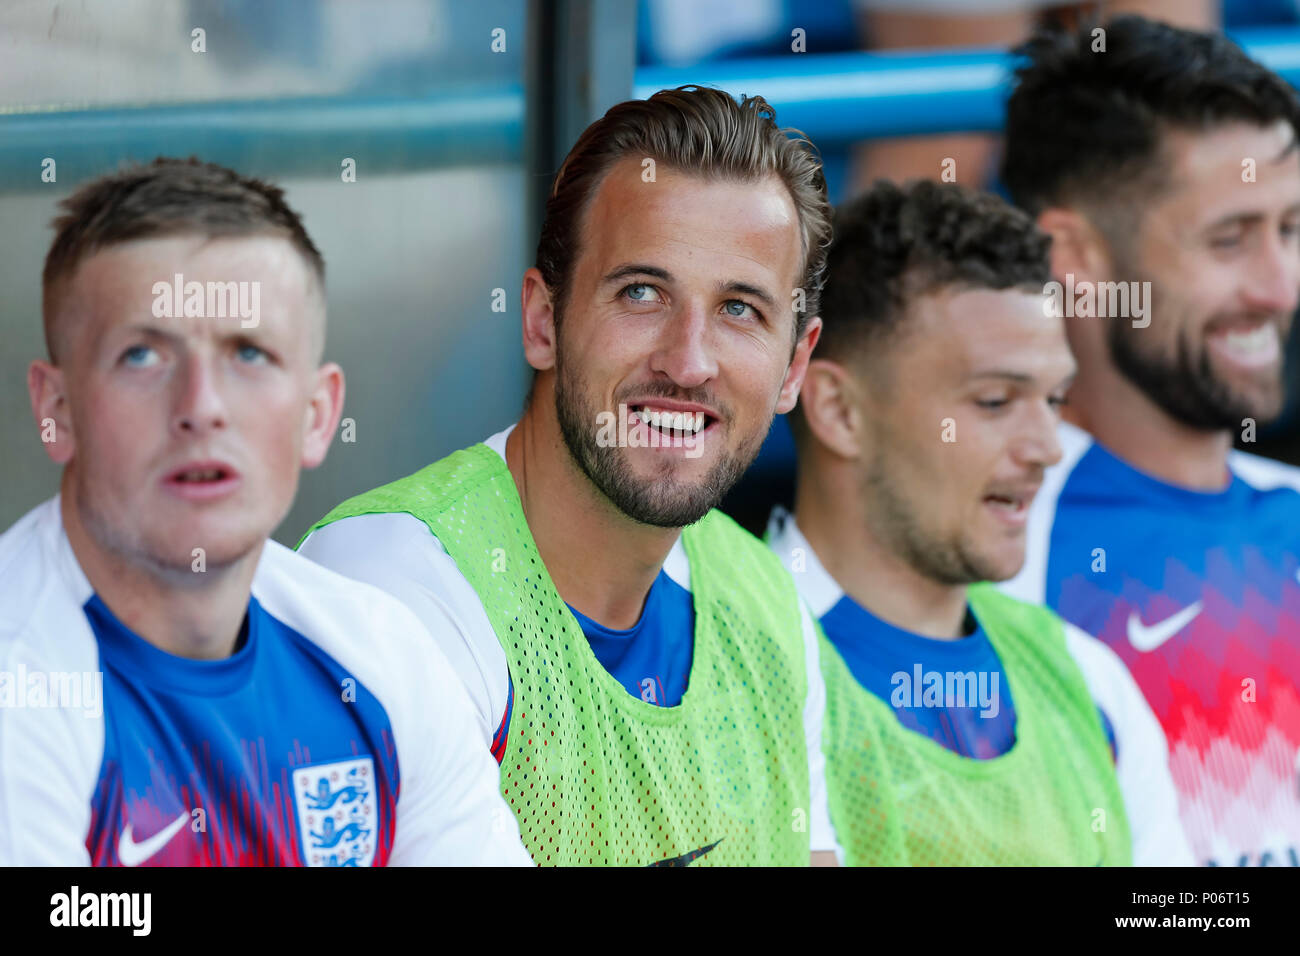 Leeds, UK. 7th Jun, 2018. Harry Kane of England on the bench during the International Friendly match between England and Costa Rica at Elland Road on June 7th 2018 in Leeds, England. (Photo by Daniel Chesterton/phcimages.com) Credit: PHC Images/Alamy Live News Stock Photo